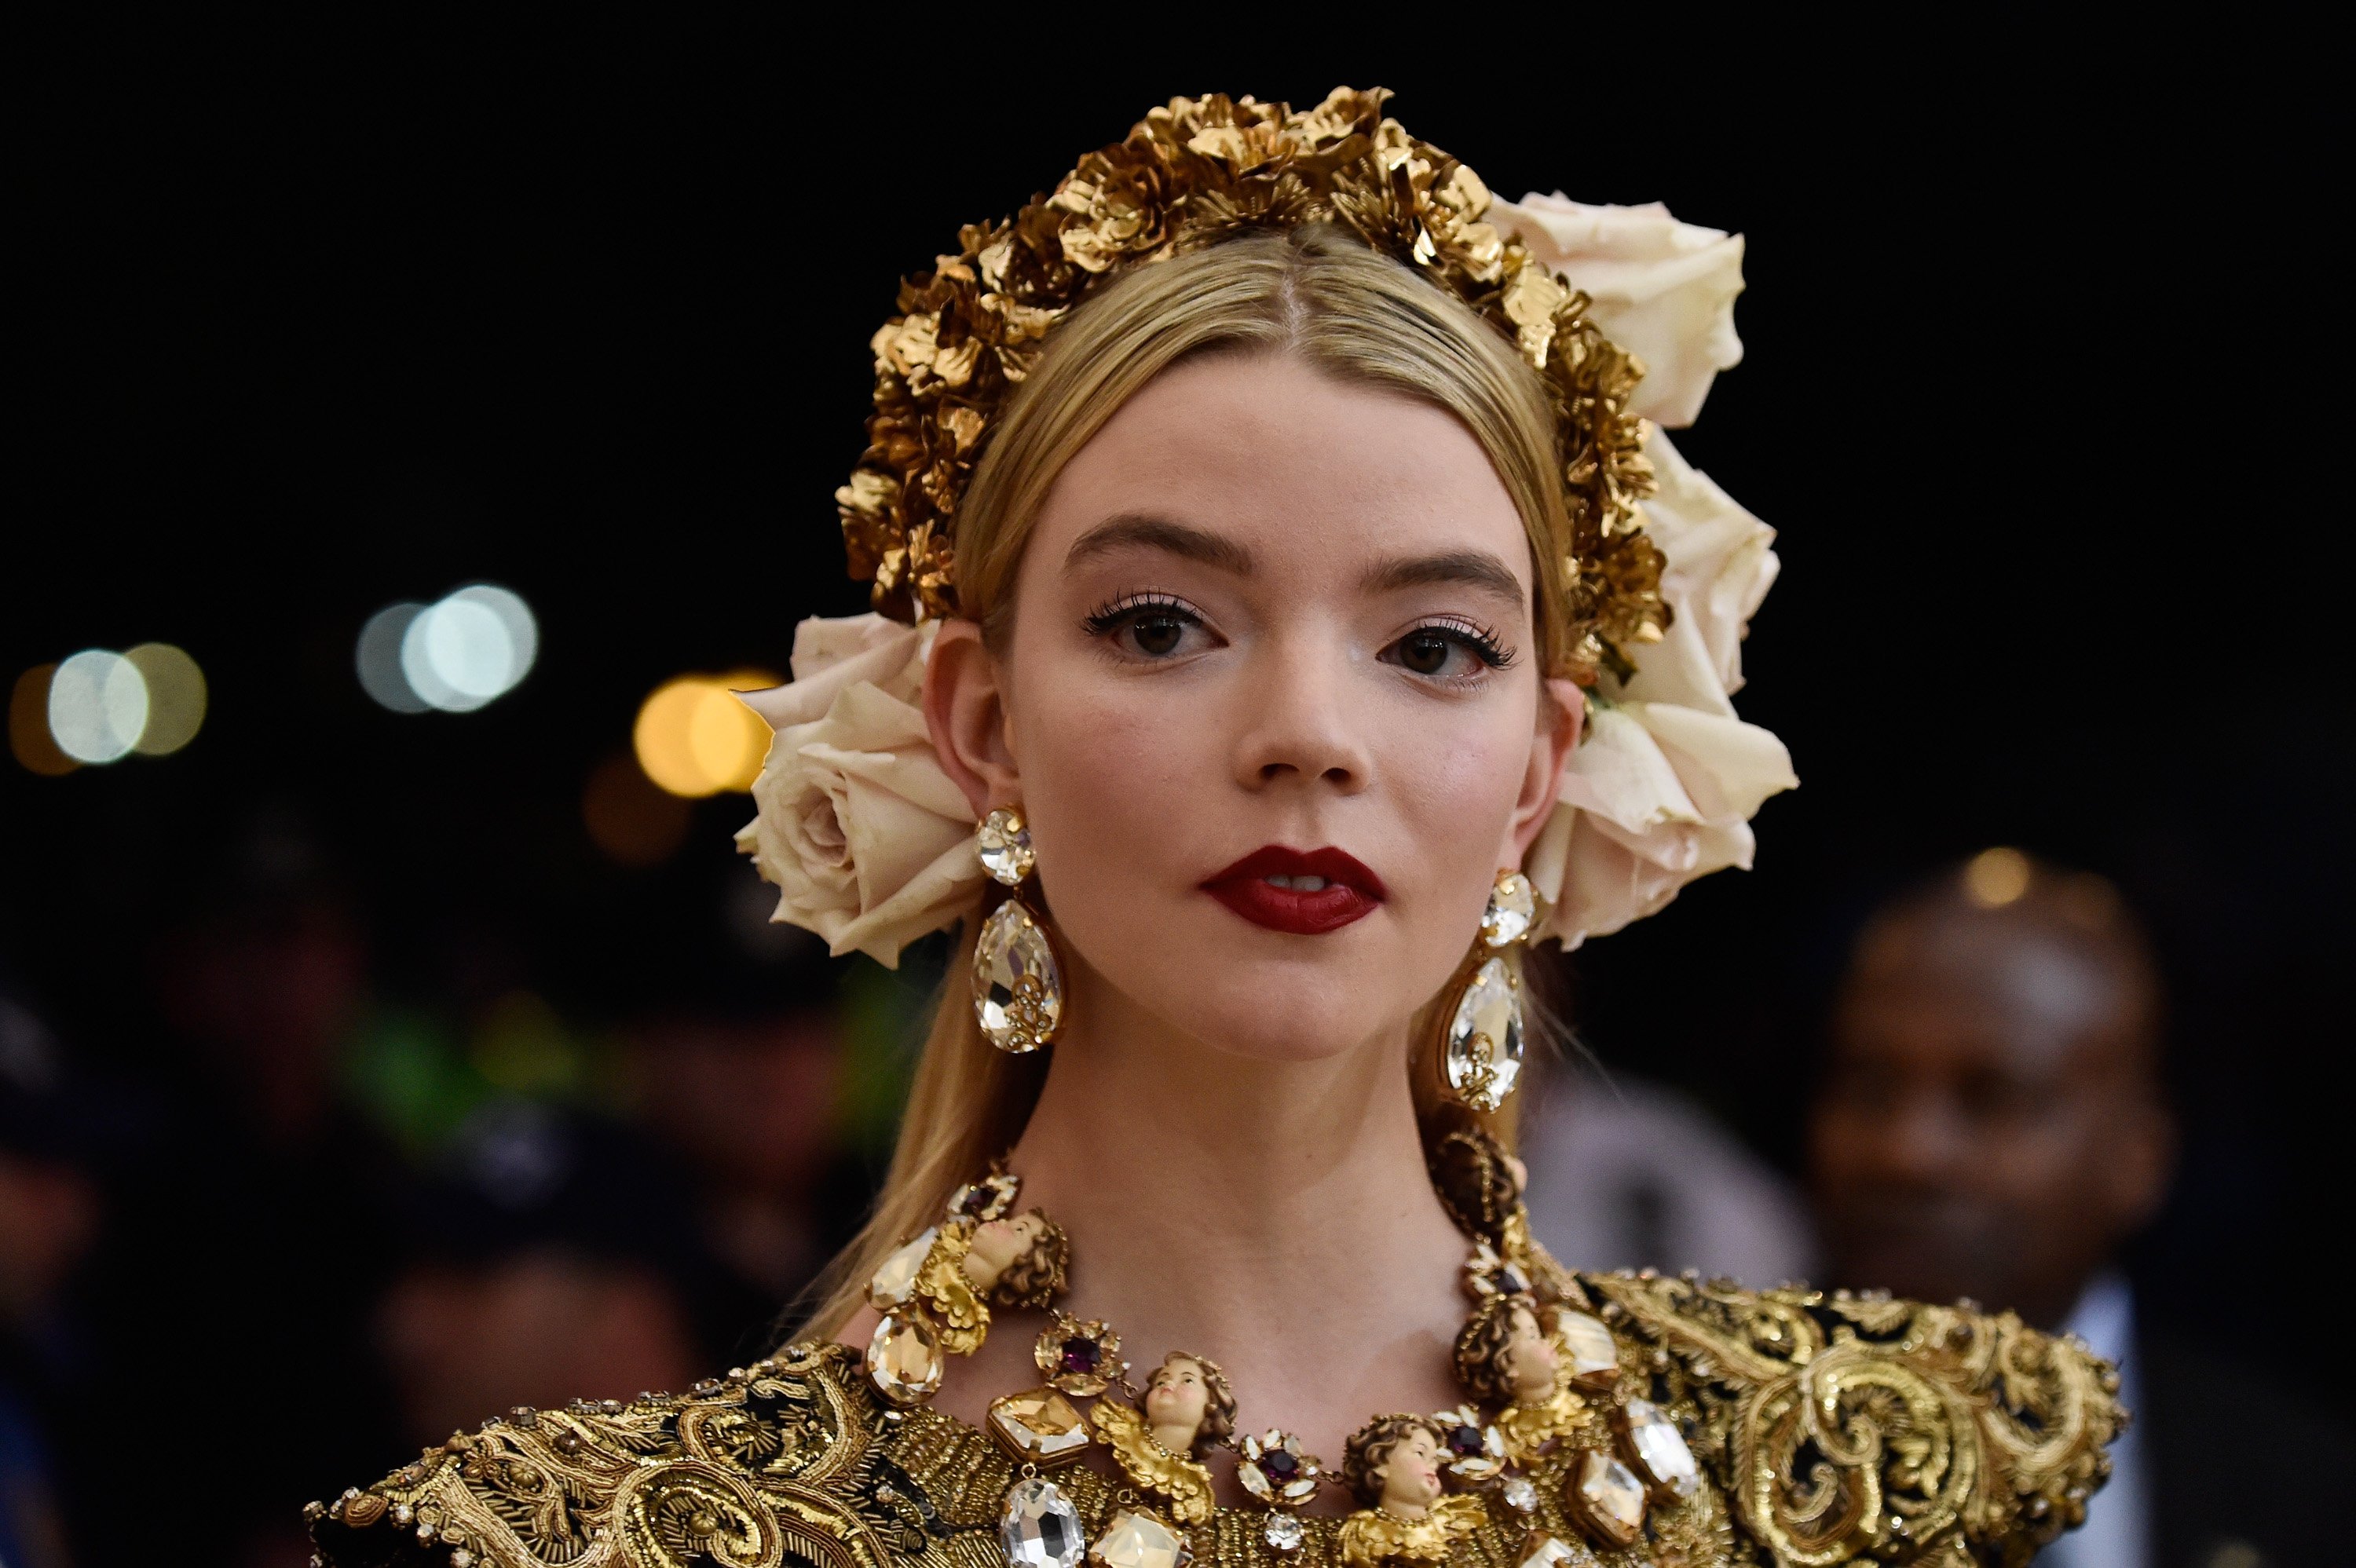 Anya Taylor-Joy at the Heavenly Bodies: Fashion & The Catholic Imagination Costume Institute Gala at The Metropolitan Museum of Art in New York City | Photo: Frazer Harrison/FilmMagic via Getty Images